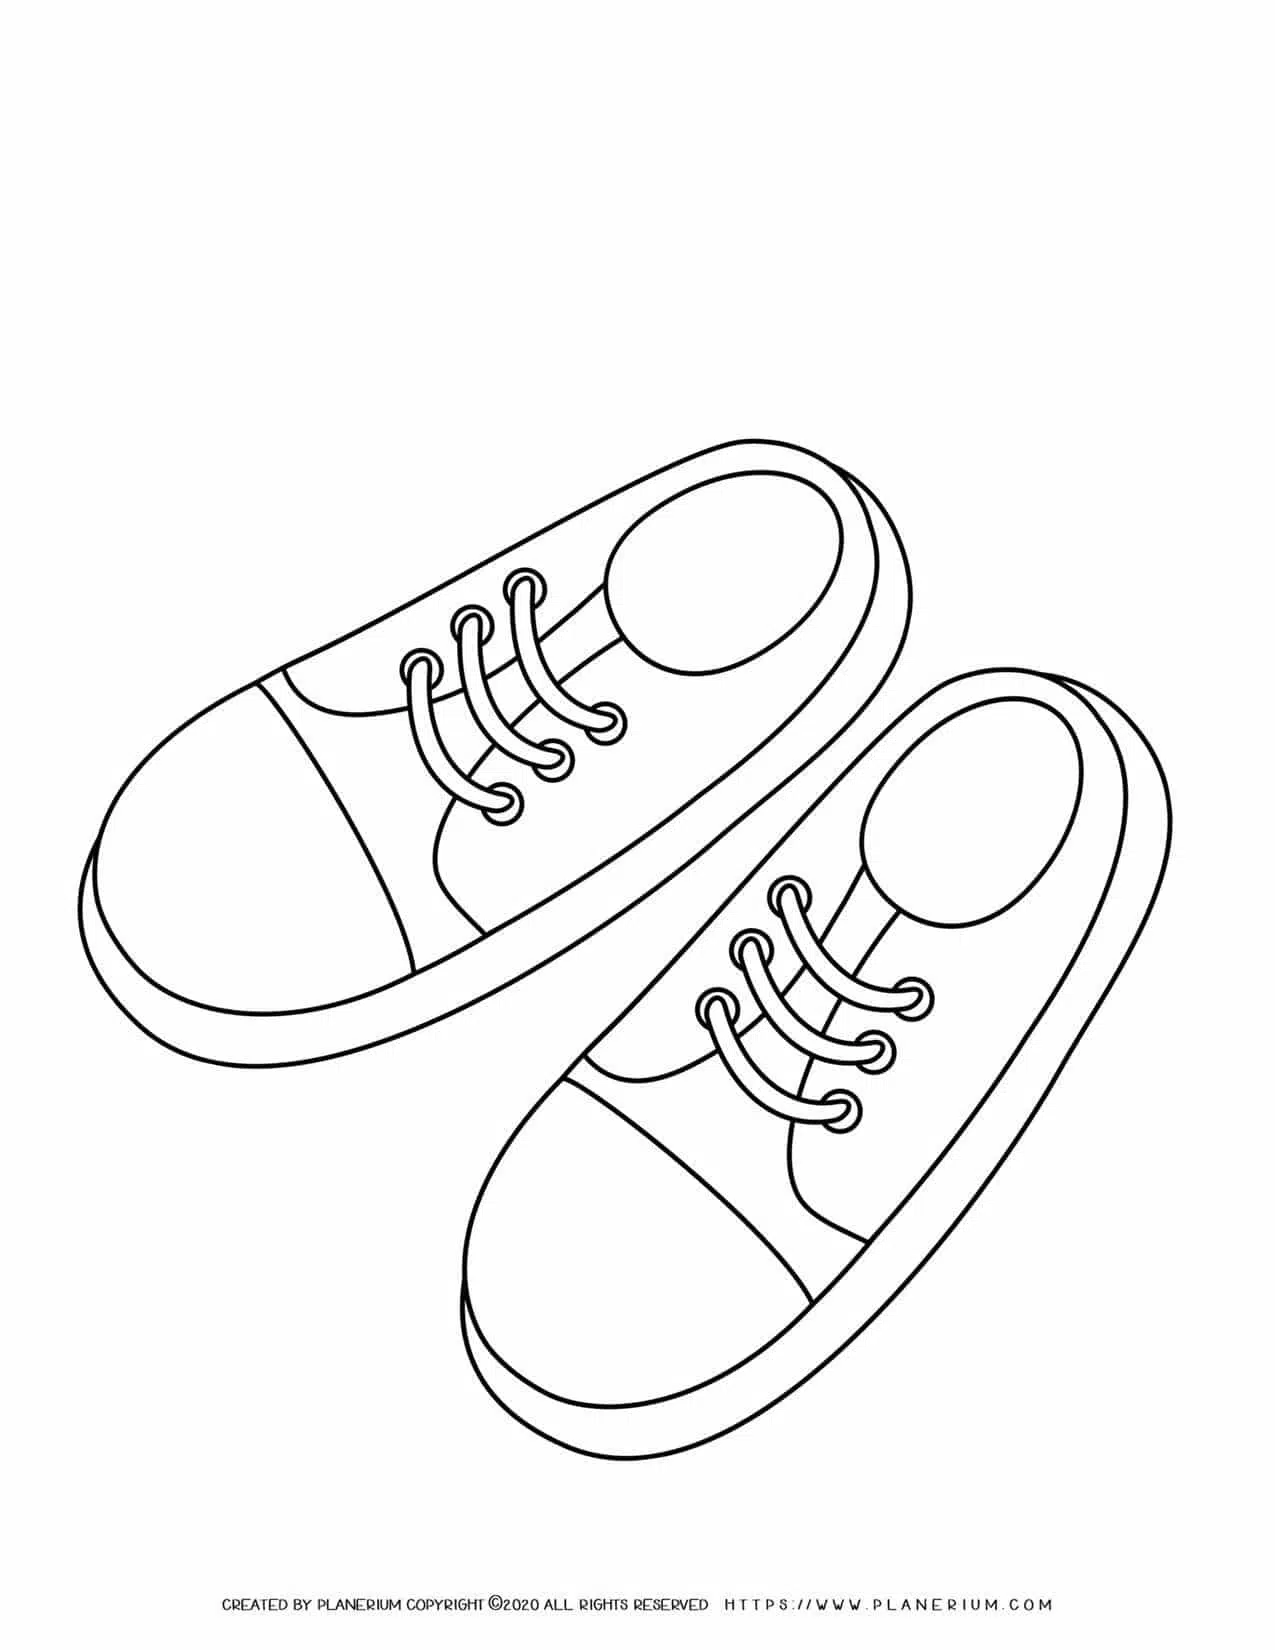 Free Outline Of Shoe, Download Free Outline Of Shoe png images, Free  ClipArts on Clipart Library